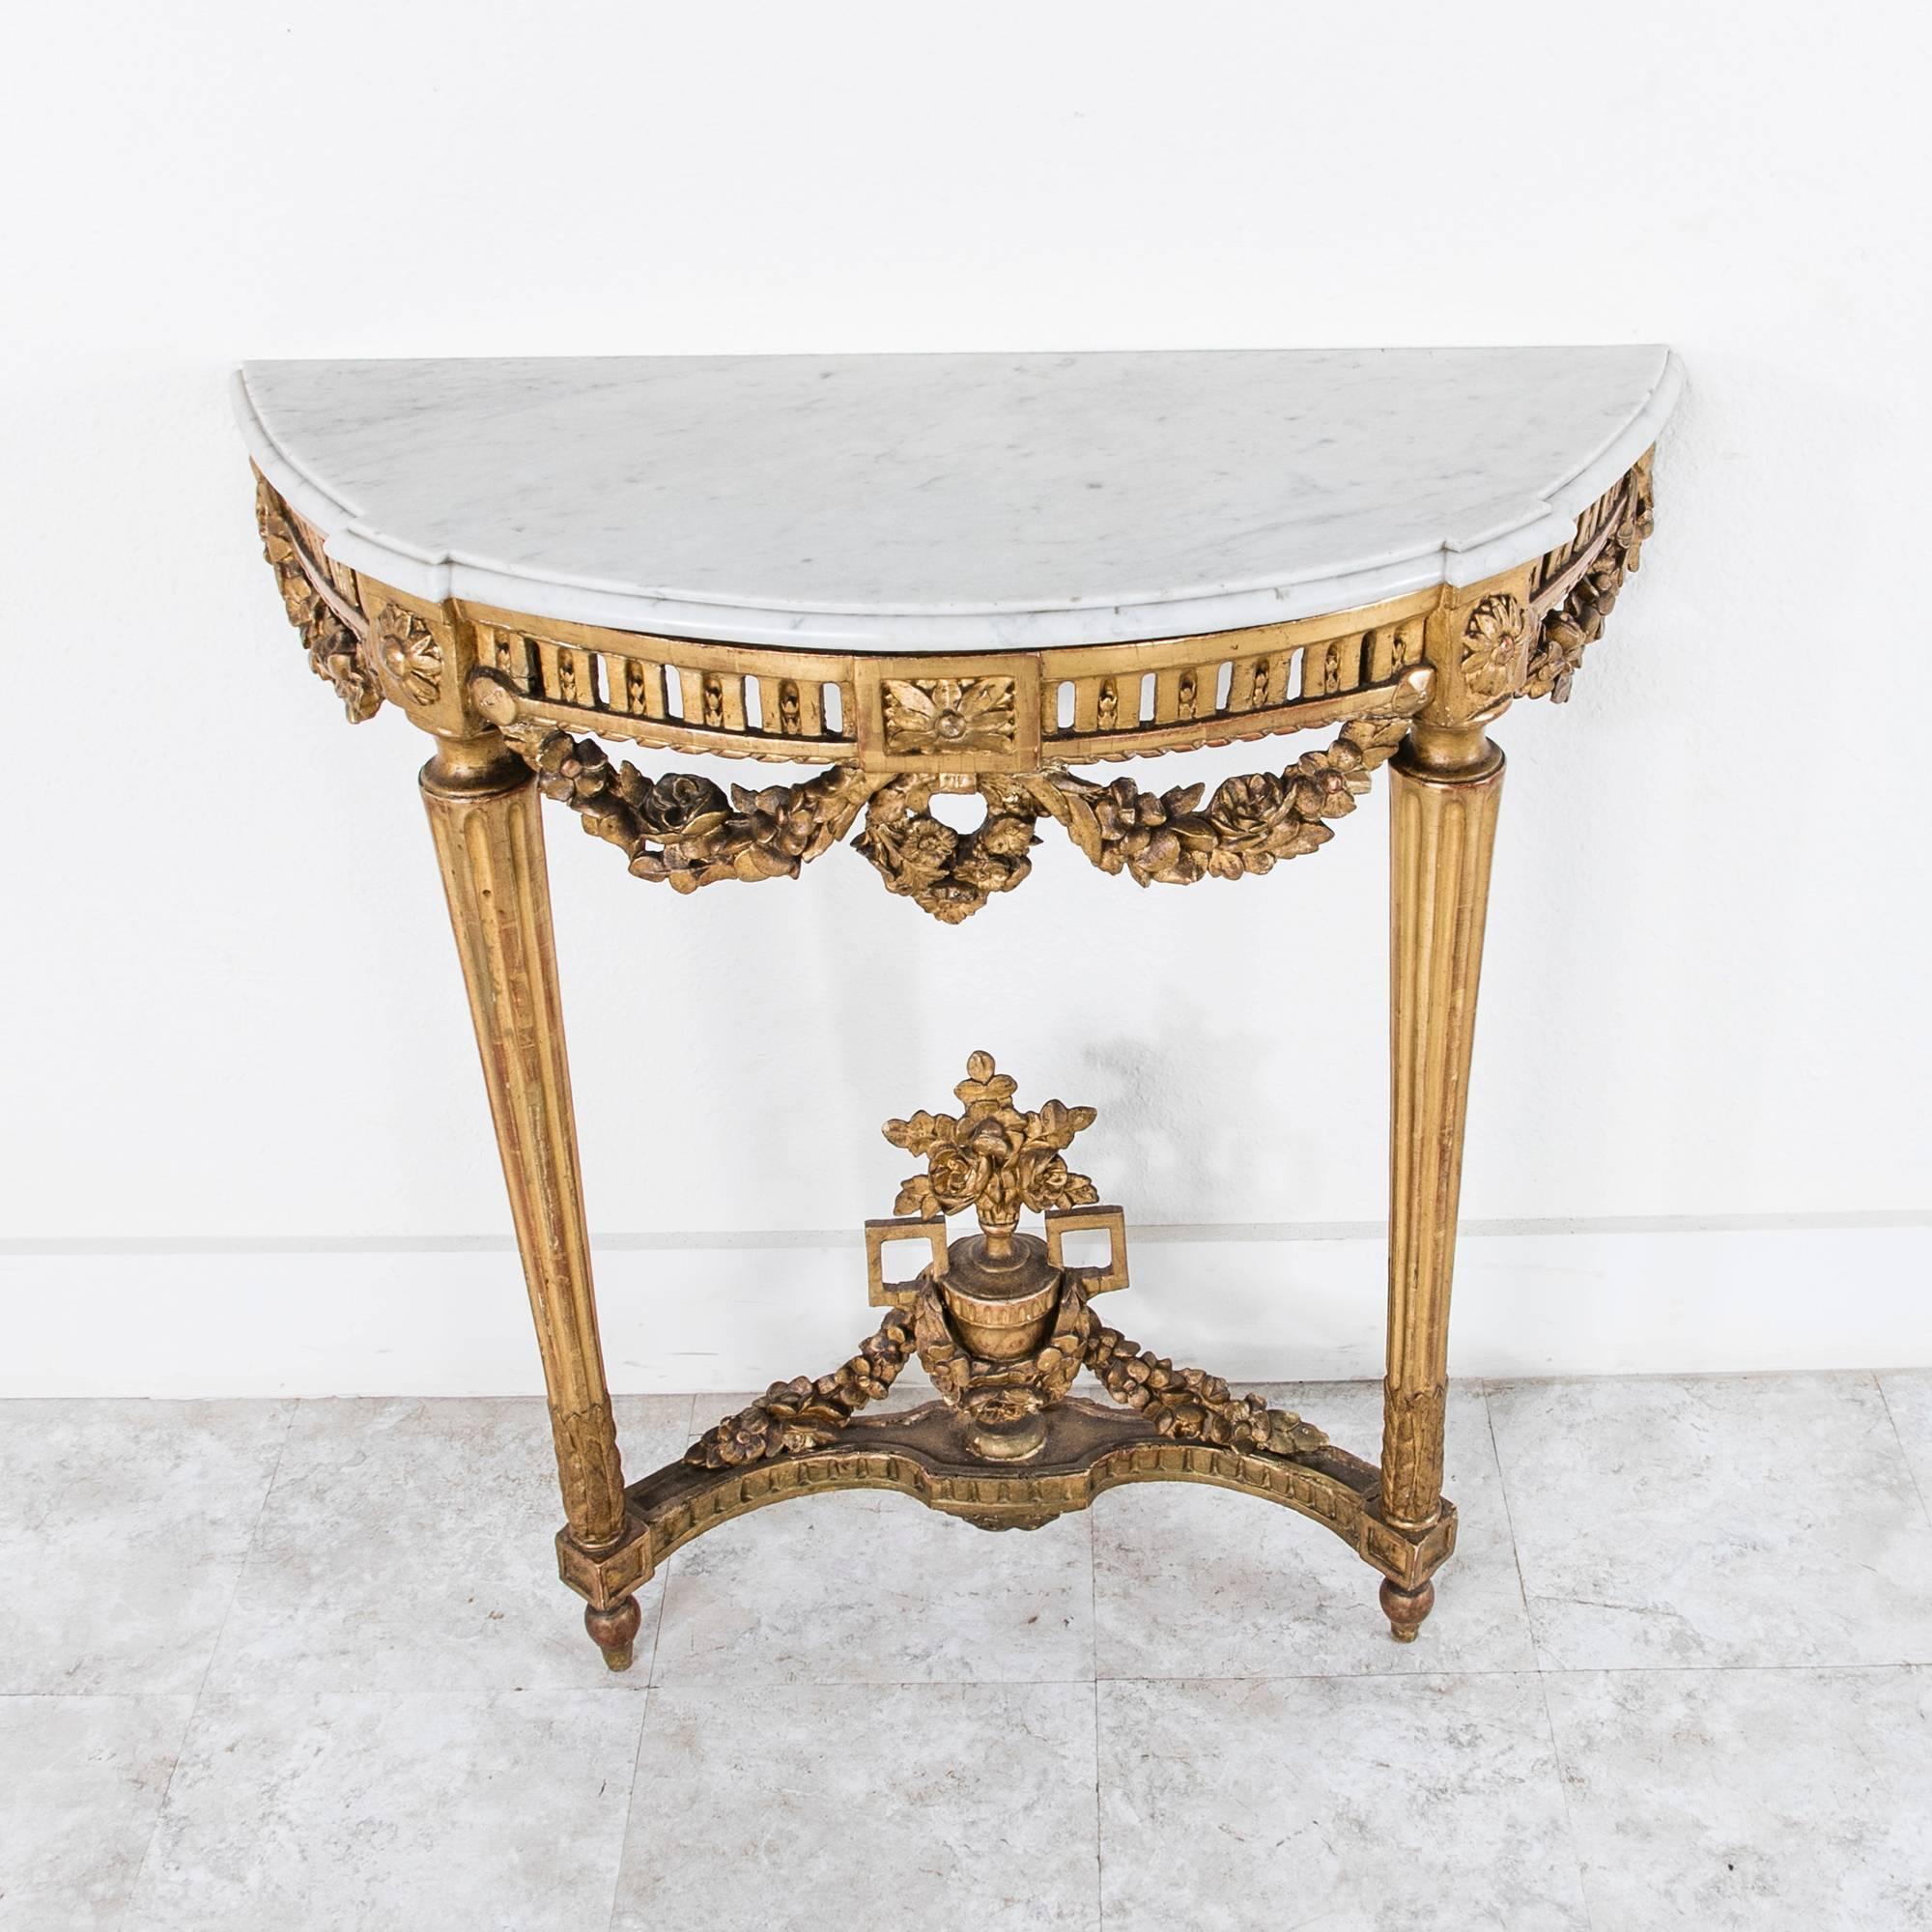 This extremely fine example of Louis XVI design was created in the late 18th century. Its beautifully carved giltwood apron features a draped, festooned garland and central wreath. Elegant slim fluted legs lead to a lower transom with a tall and